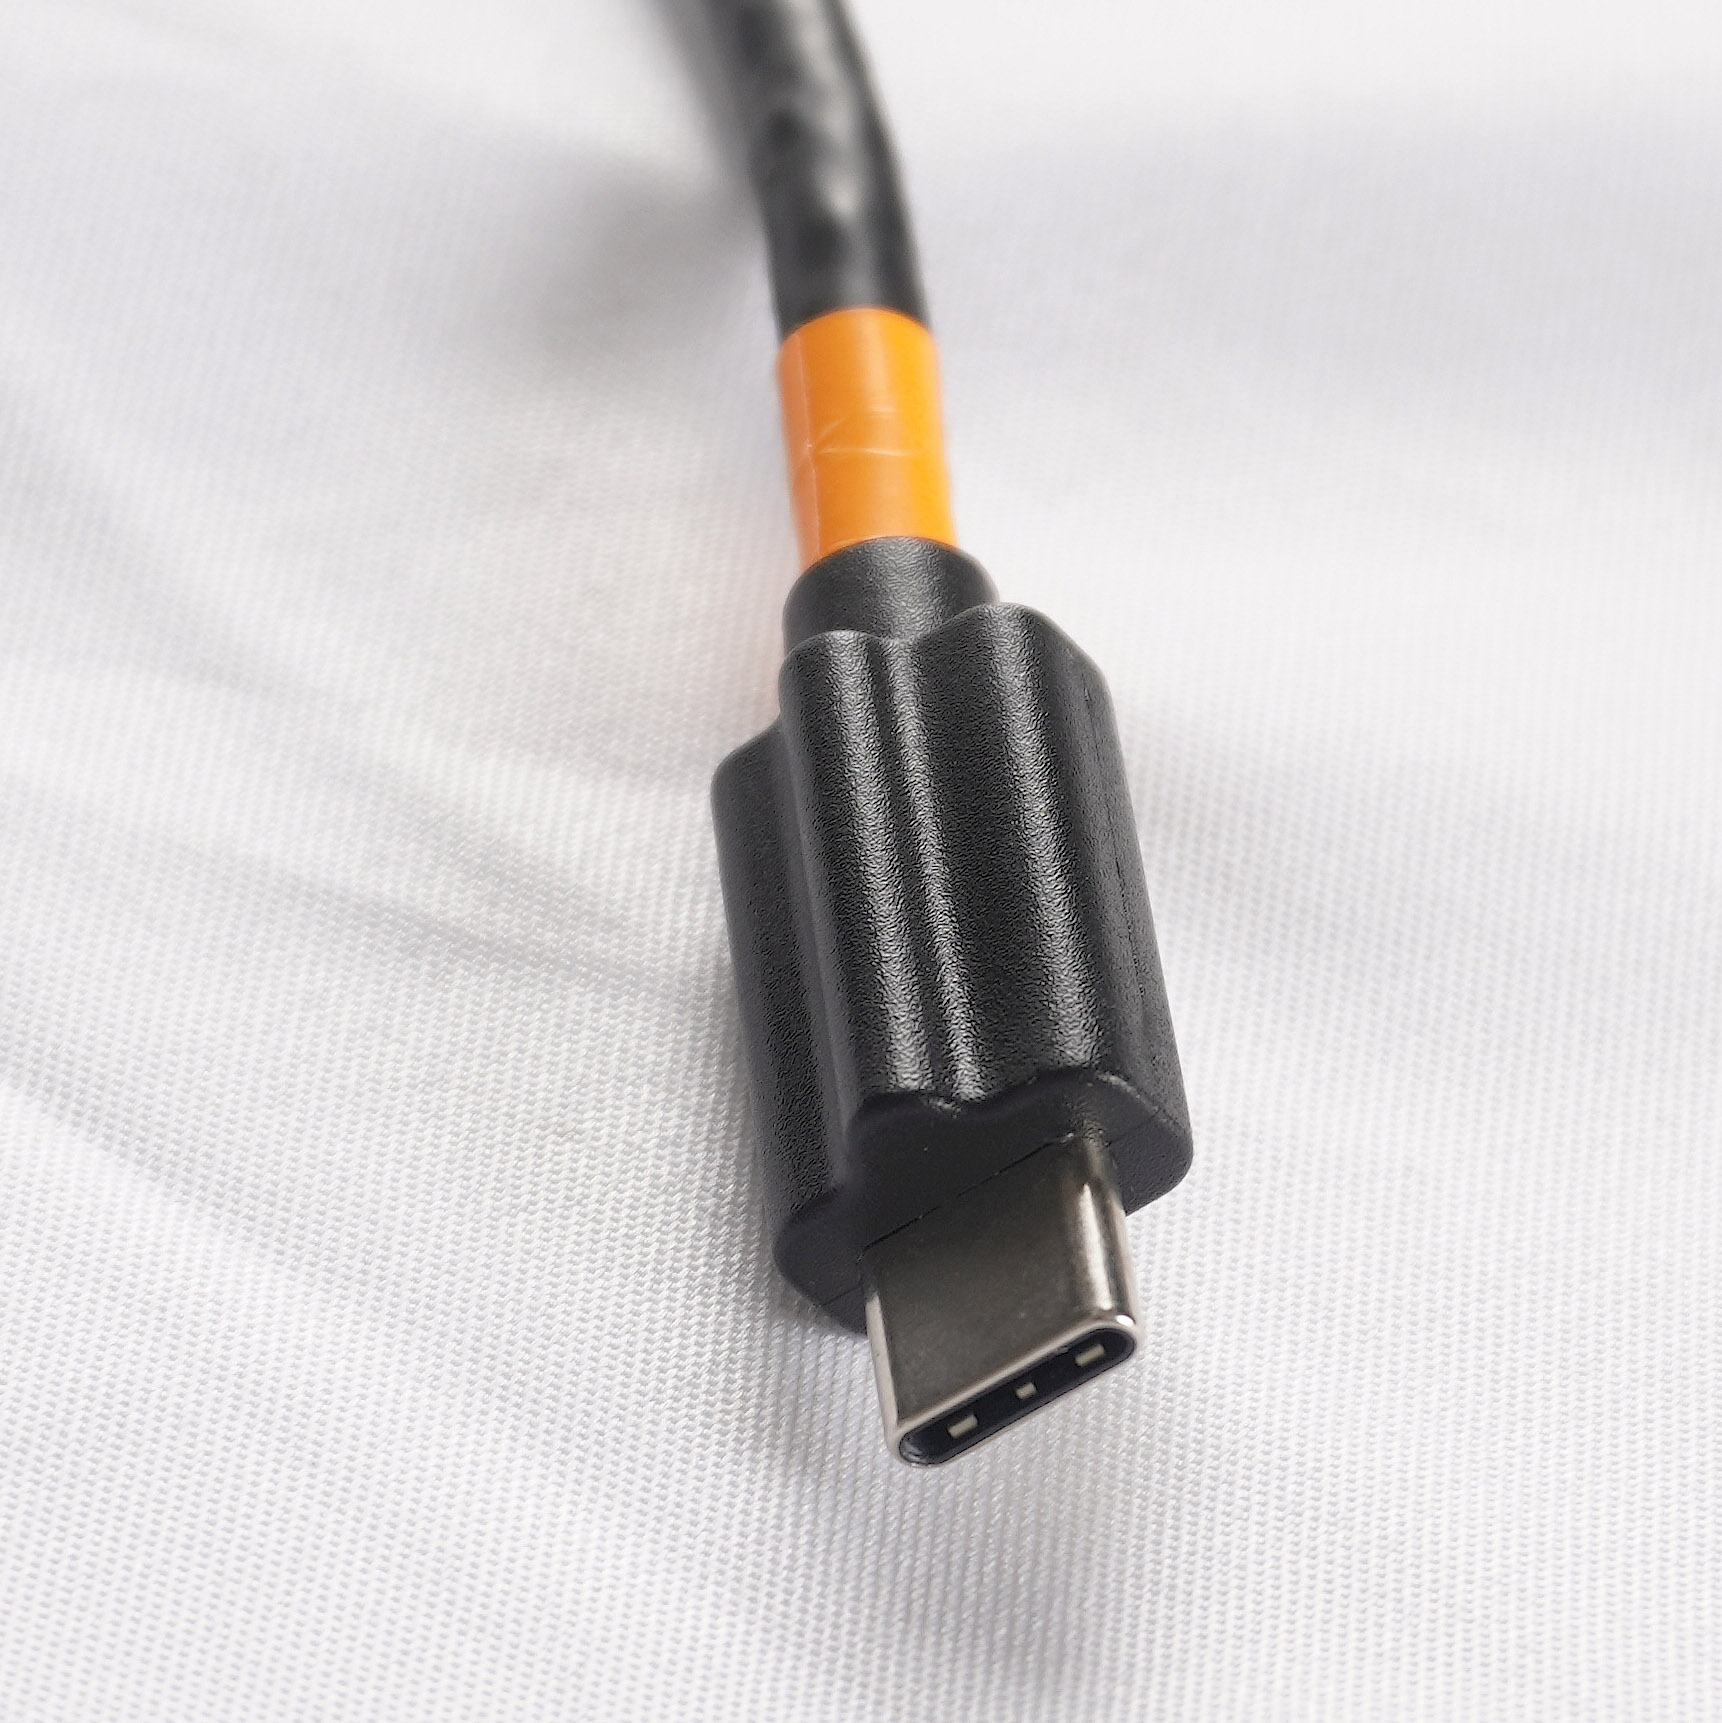 Panel Mount USB-C Female To USB-C Male Cable